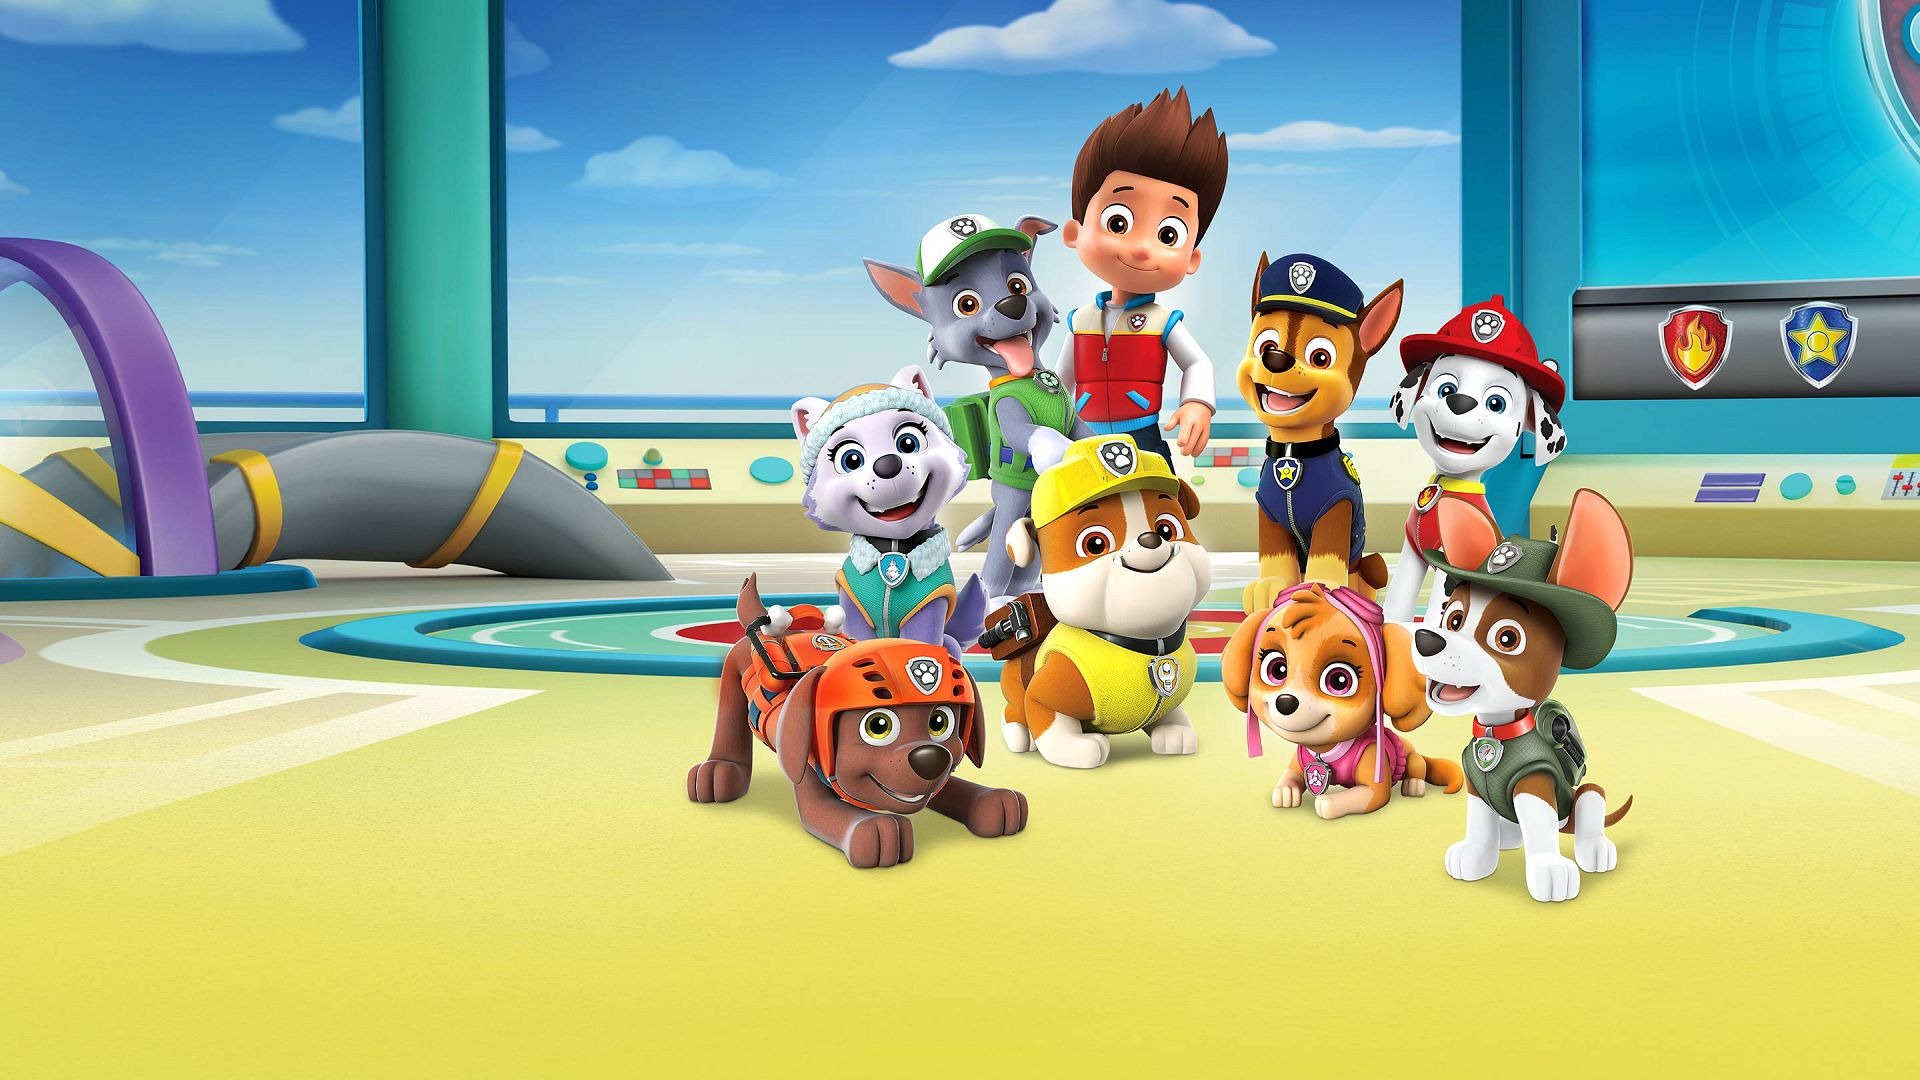 Nickelodeon's 'PAW Patrol' Spin-Off, 'Rubble & Crew' — See First Look